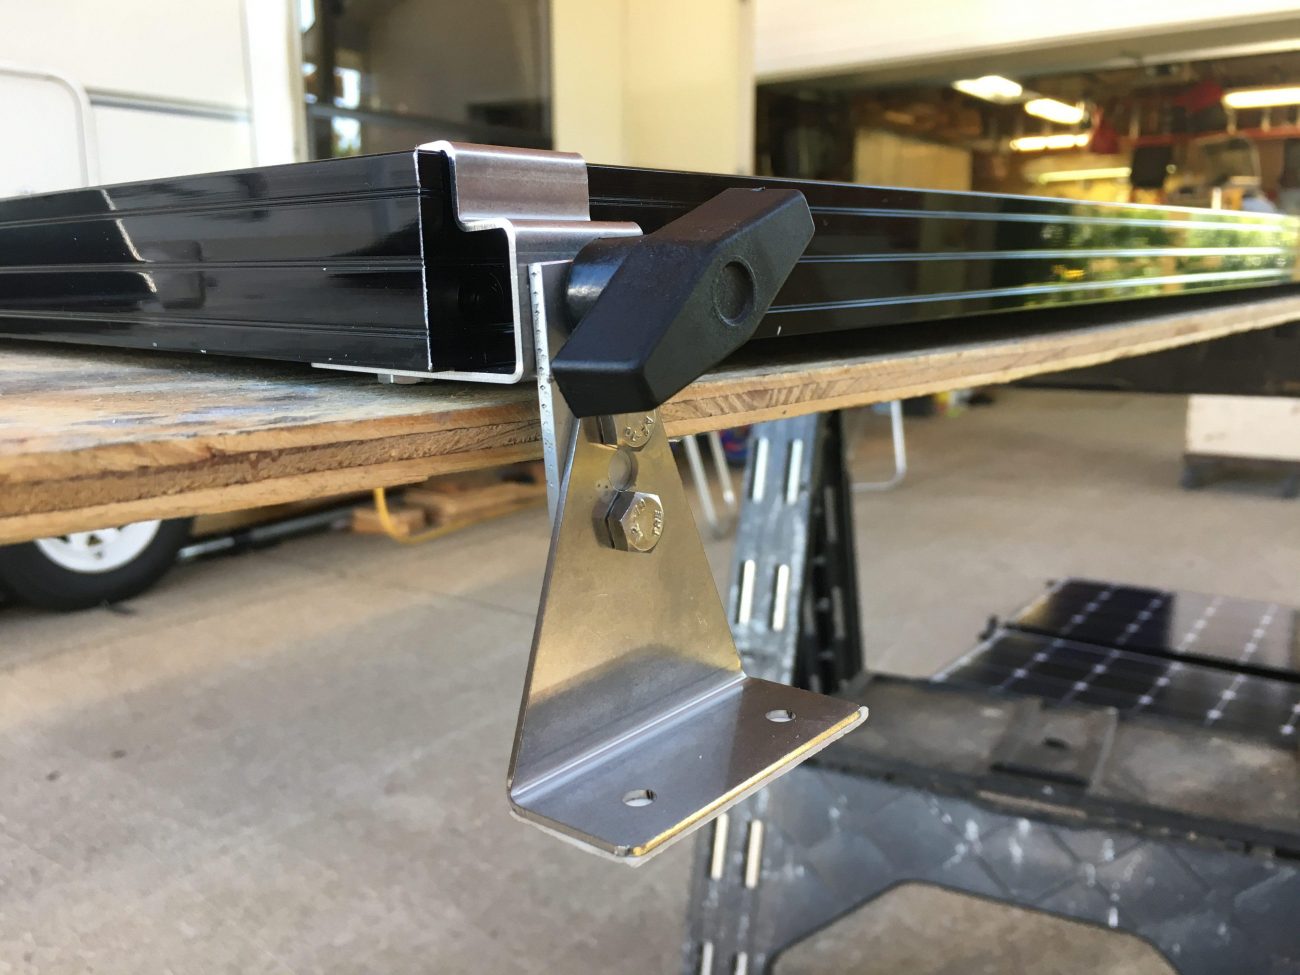 Mounting bracket for tilting solar panels on a vintage Airstream rounded roof.